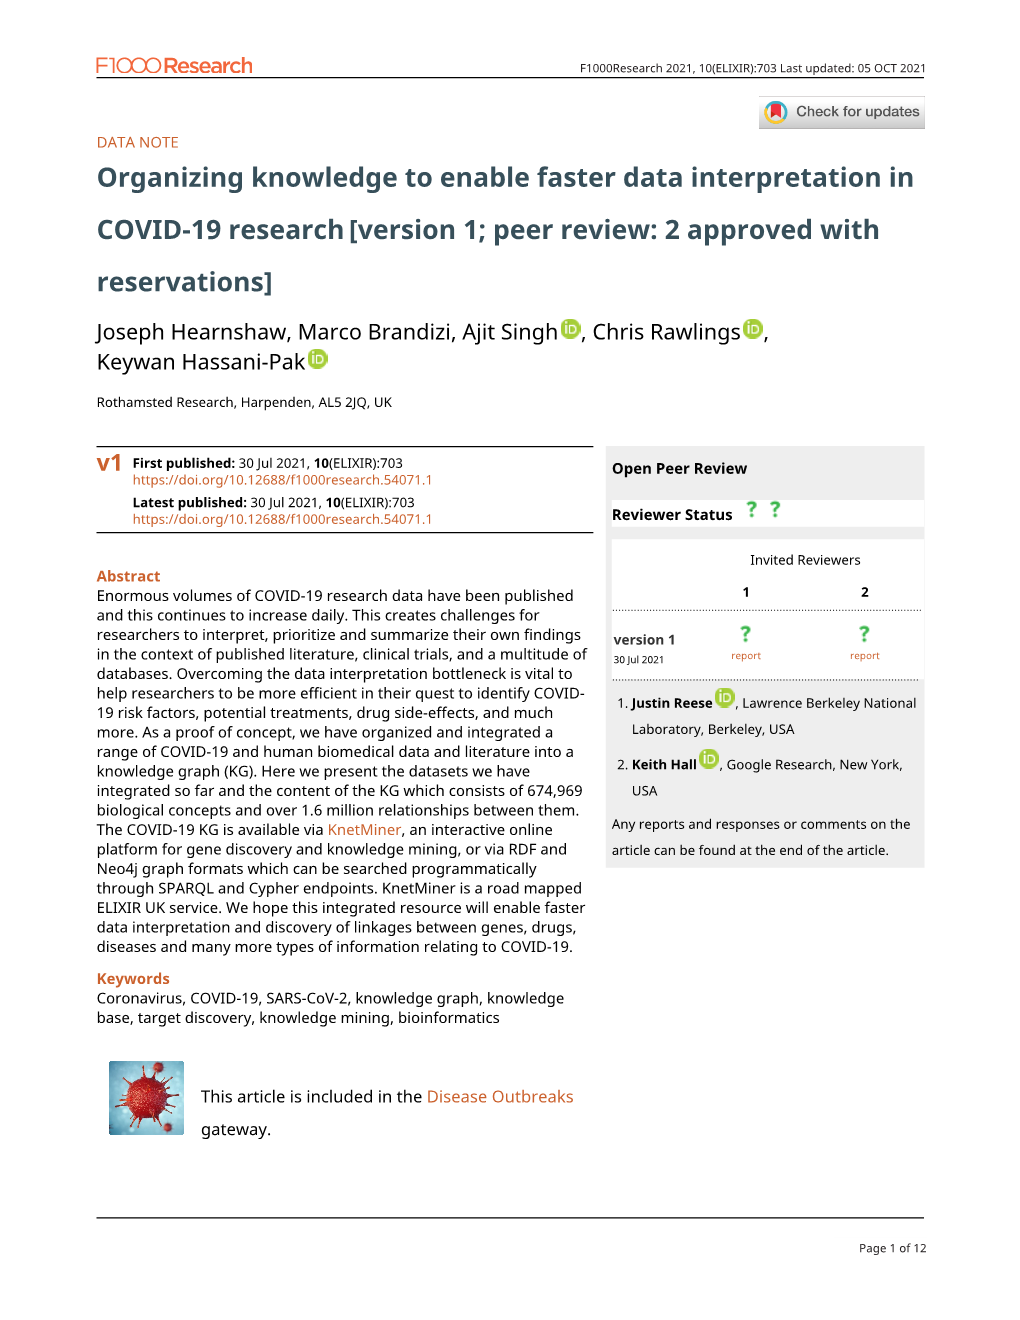 Organizing Knowledge to Enable Faster Data Interpretation in COVID